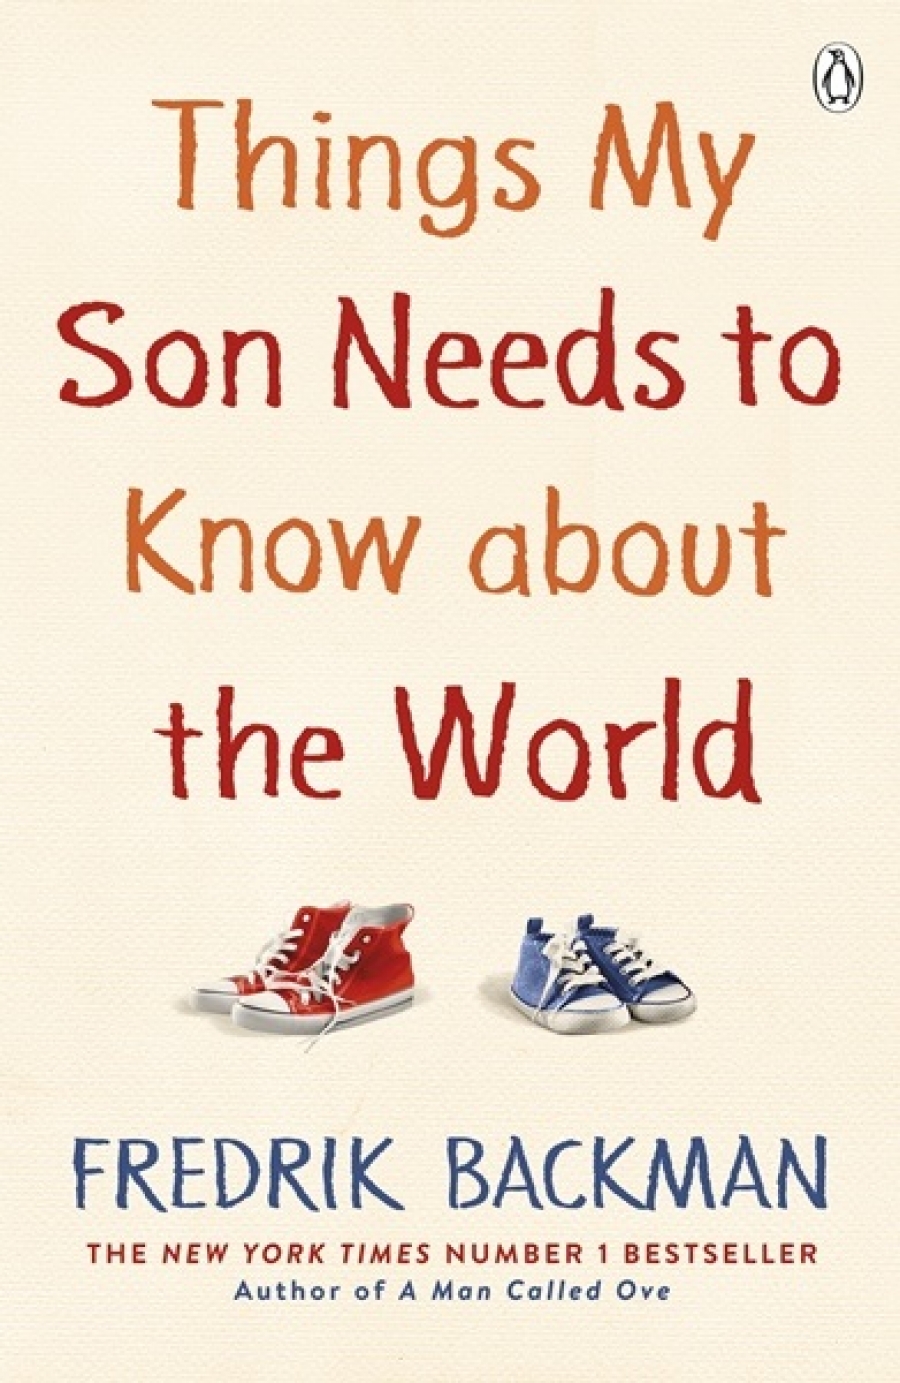 Backman, Fredrik Things My Son Needs to Know About the World 